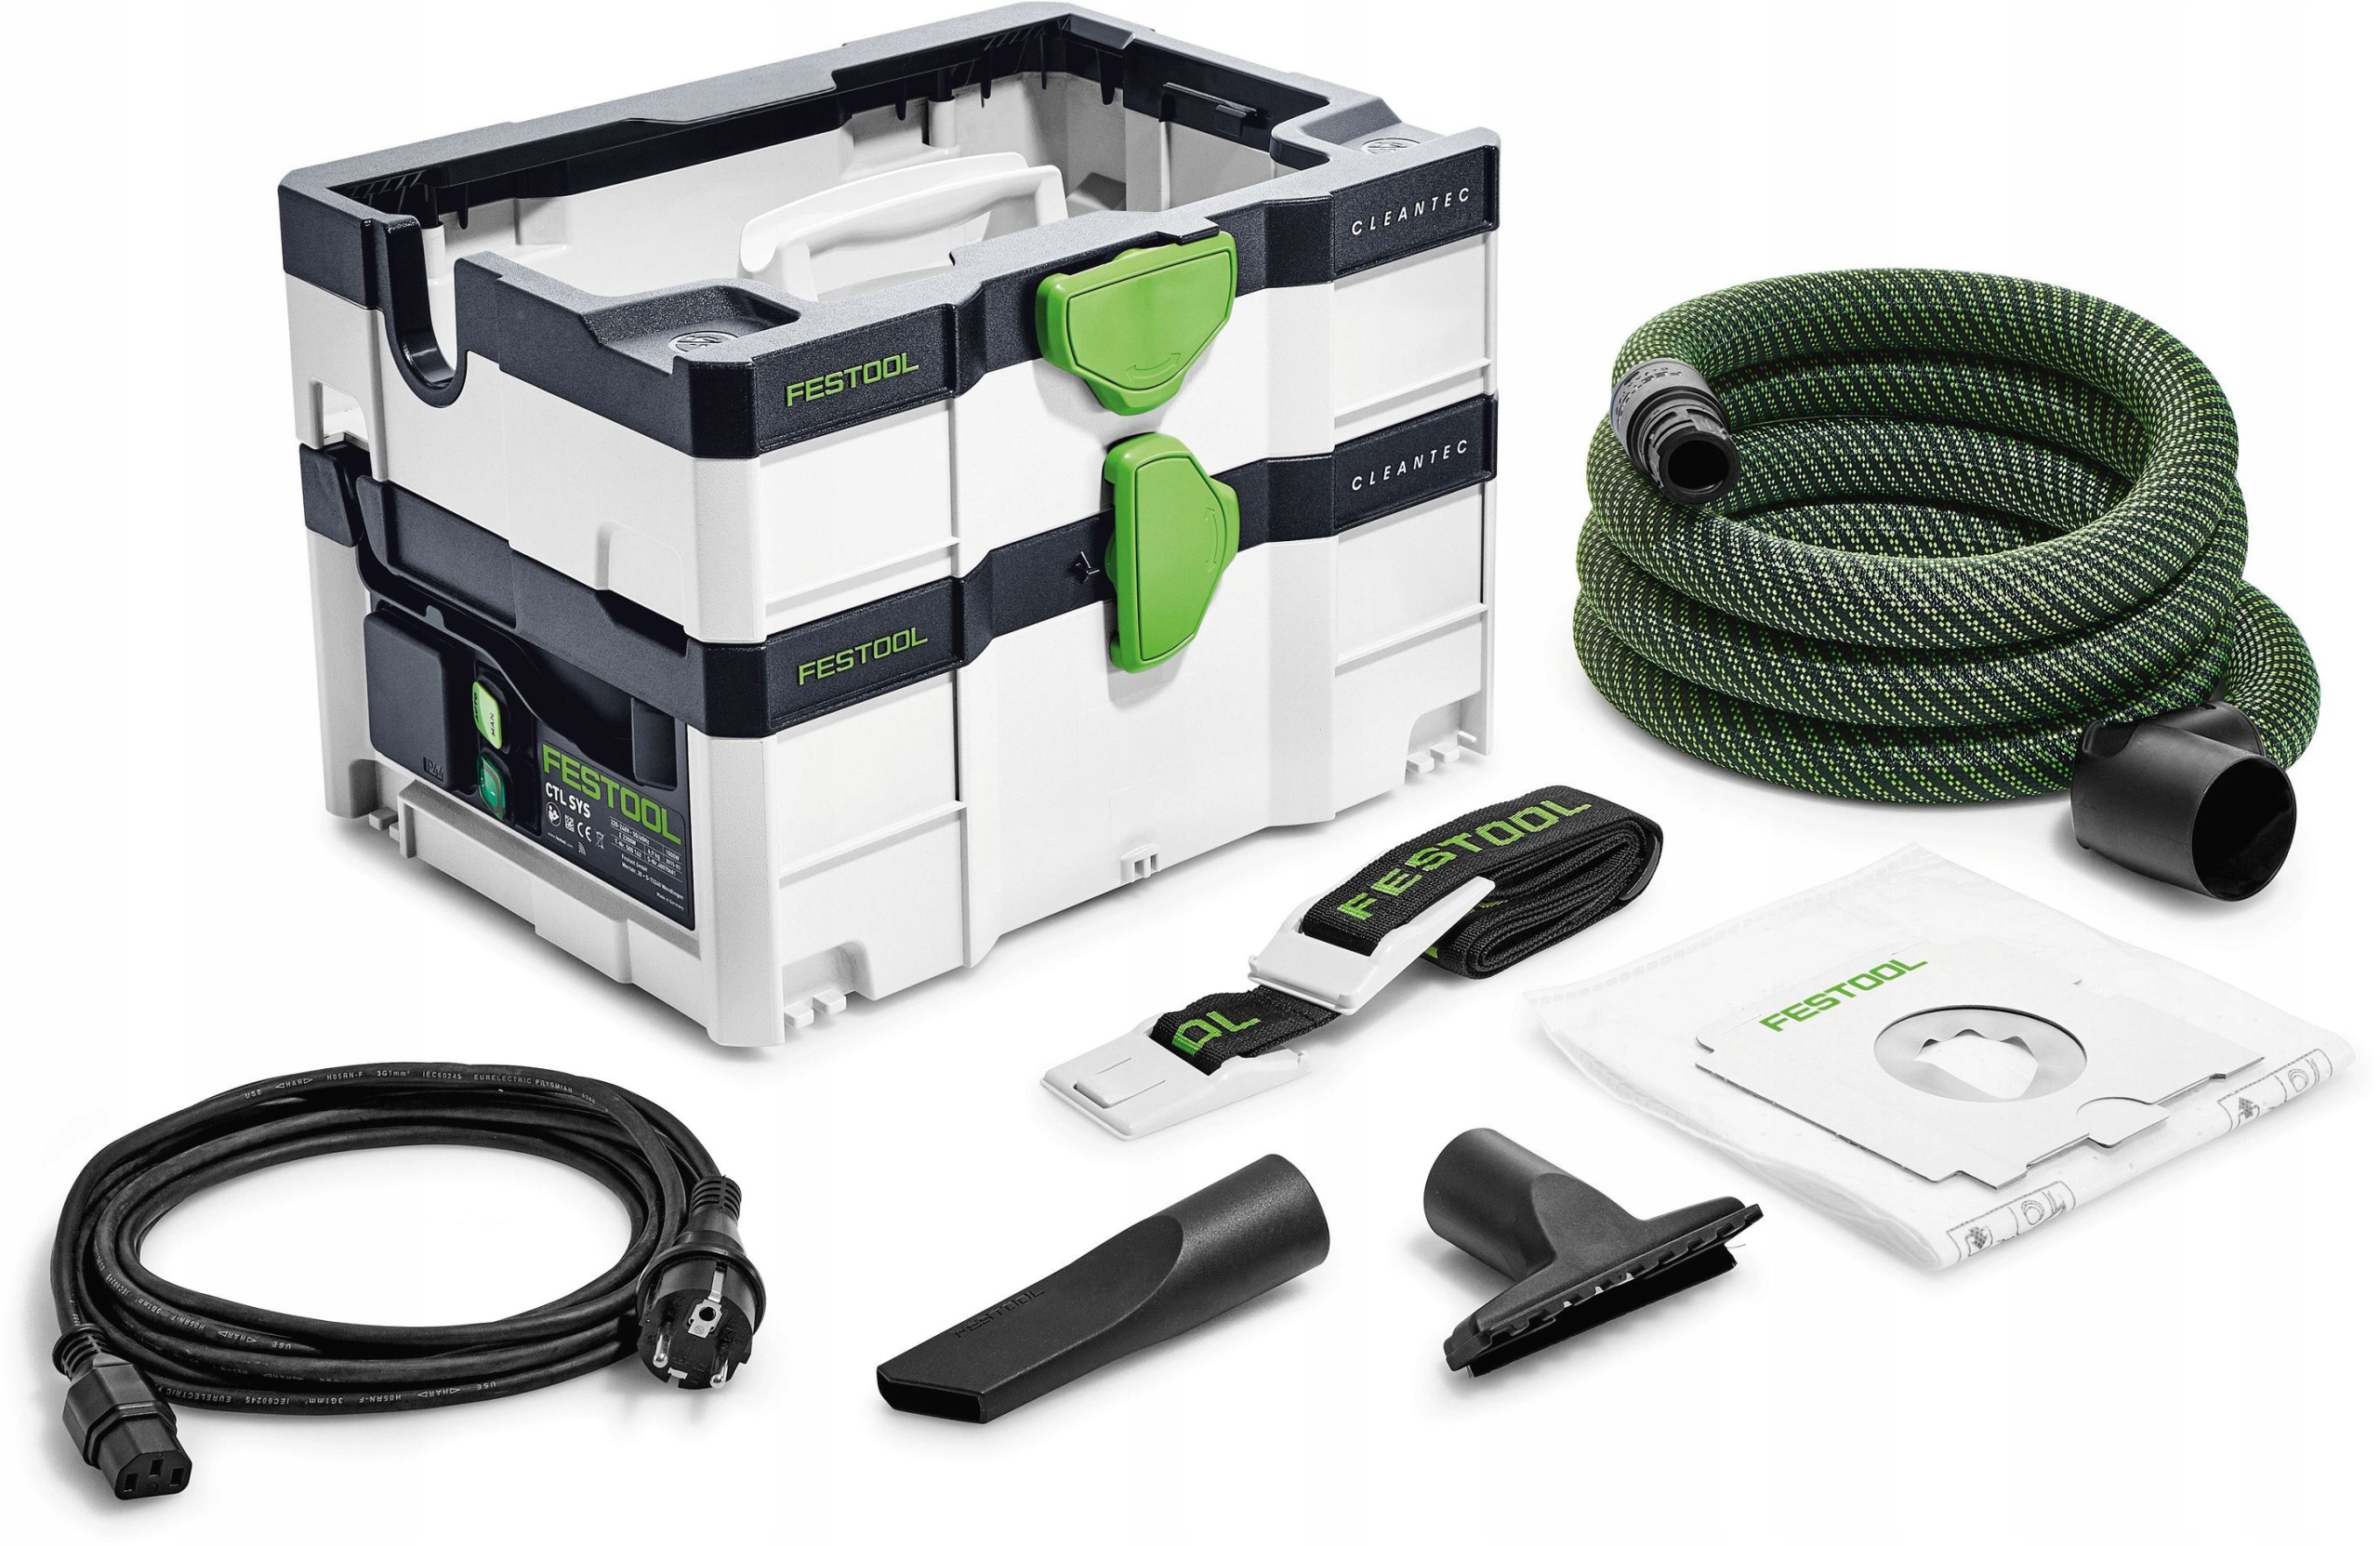 Sys 64738. Festool CTL sys 575279. Пылеудаляющий аппарат CTL sys Festool. Festool CLEANTEC пылесос. Пылесос Festool CTL sys.